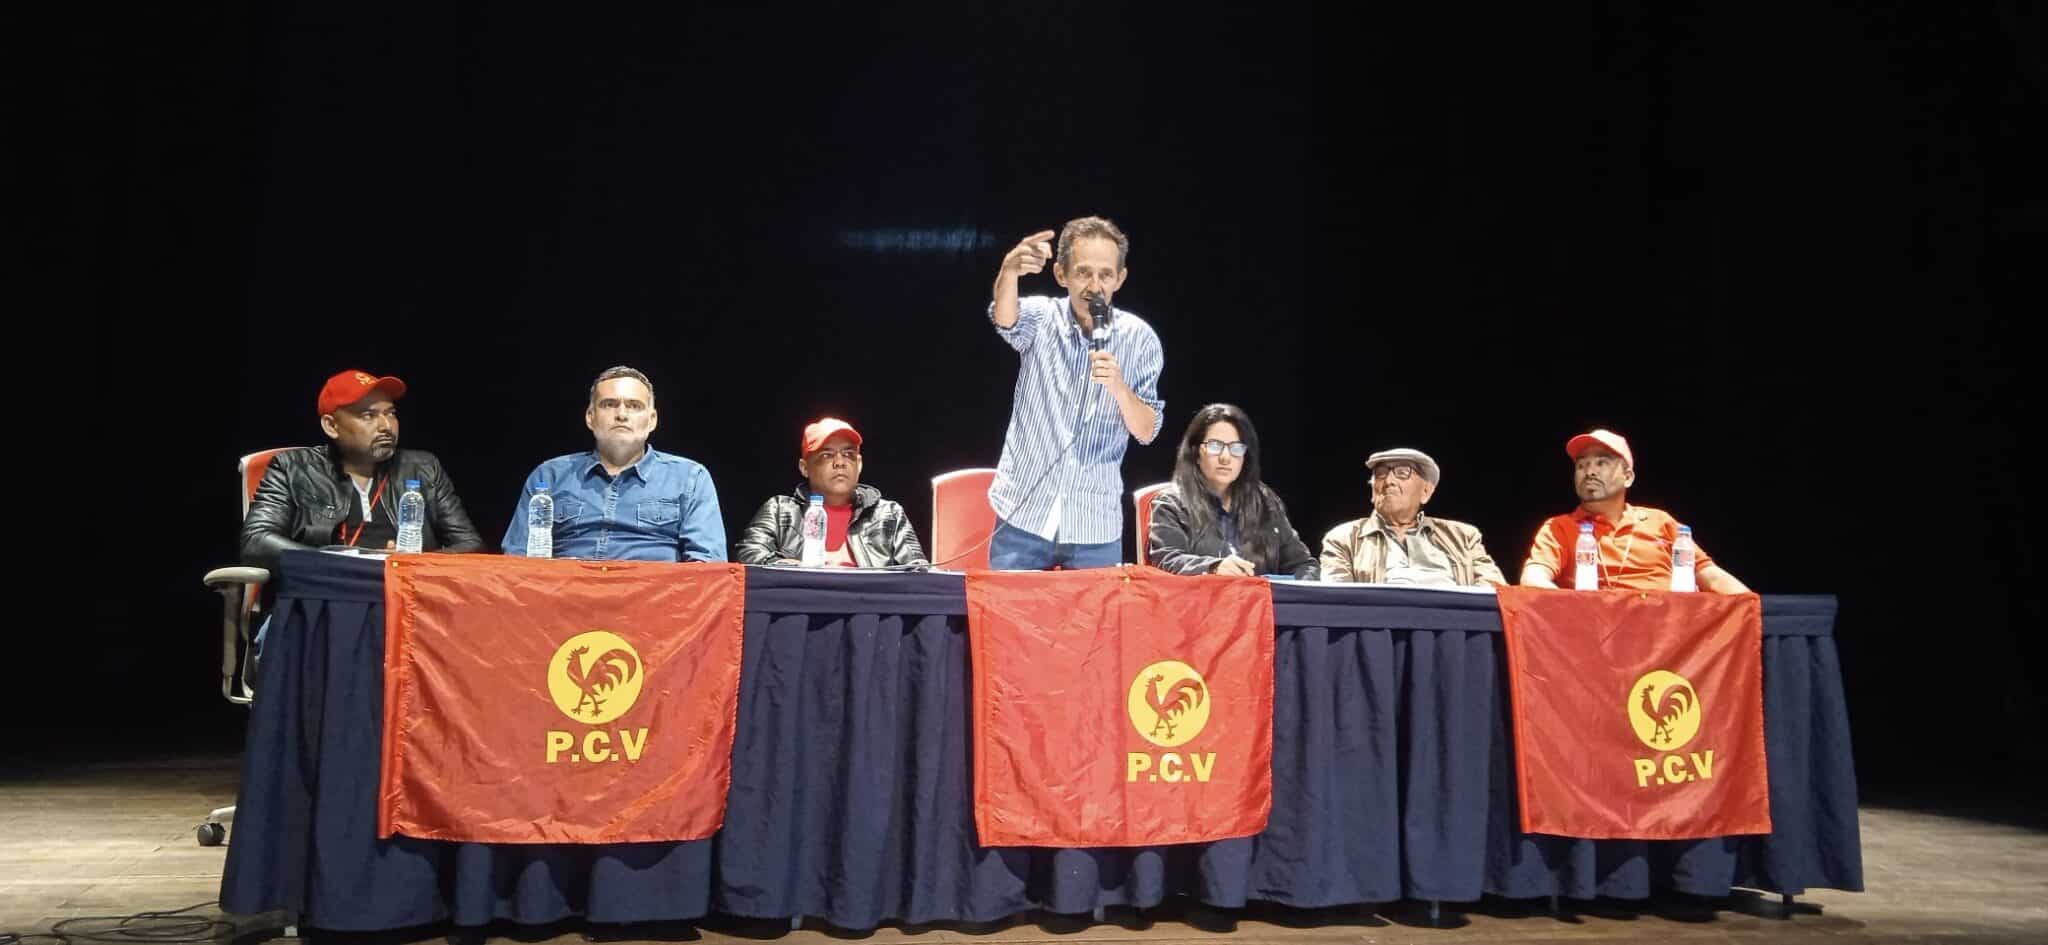 The main panel at the PCV grassroots congress organized this Sunday, May 21, in Caracas, Venezuela. Photo: Twitter/@PCV_Patriotico.